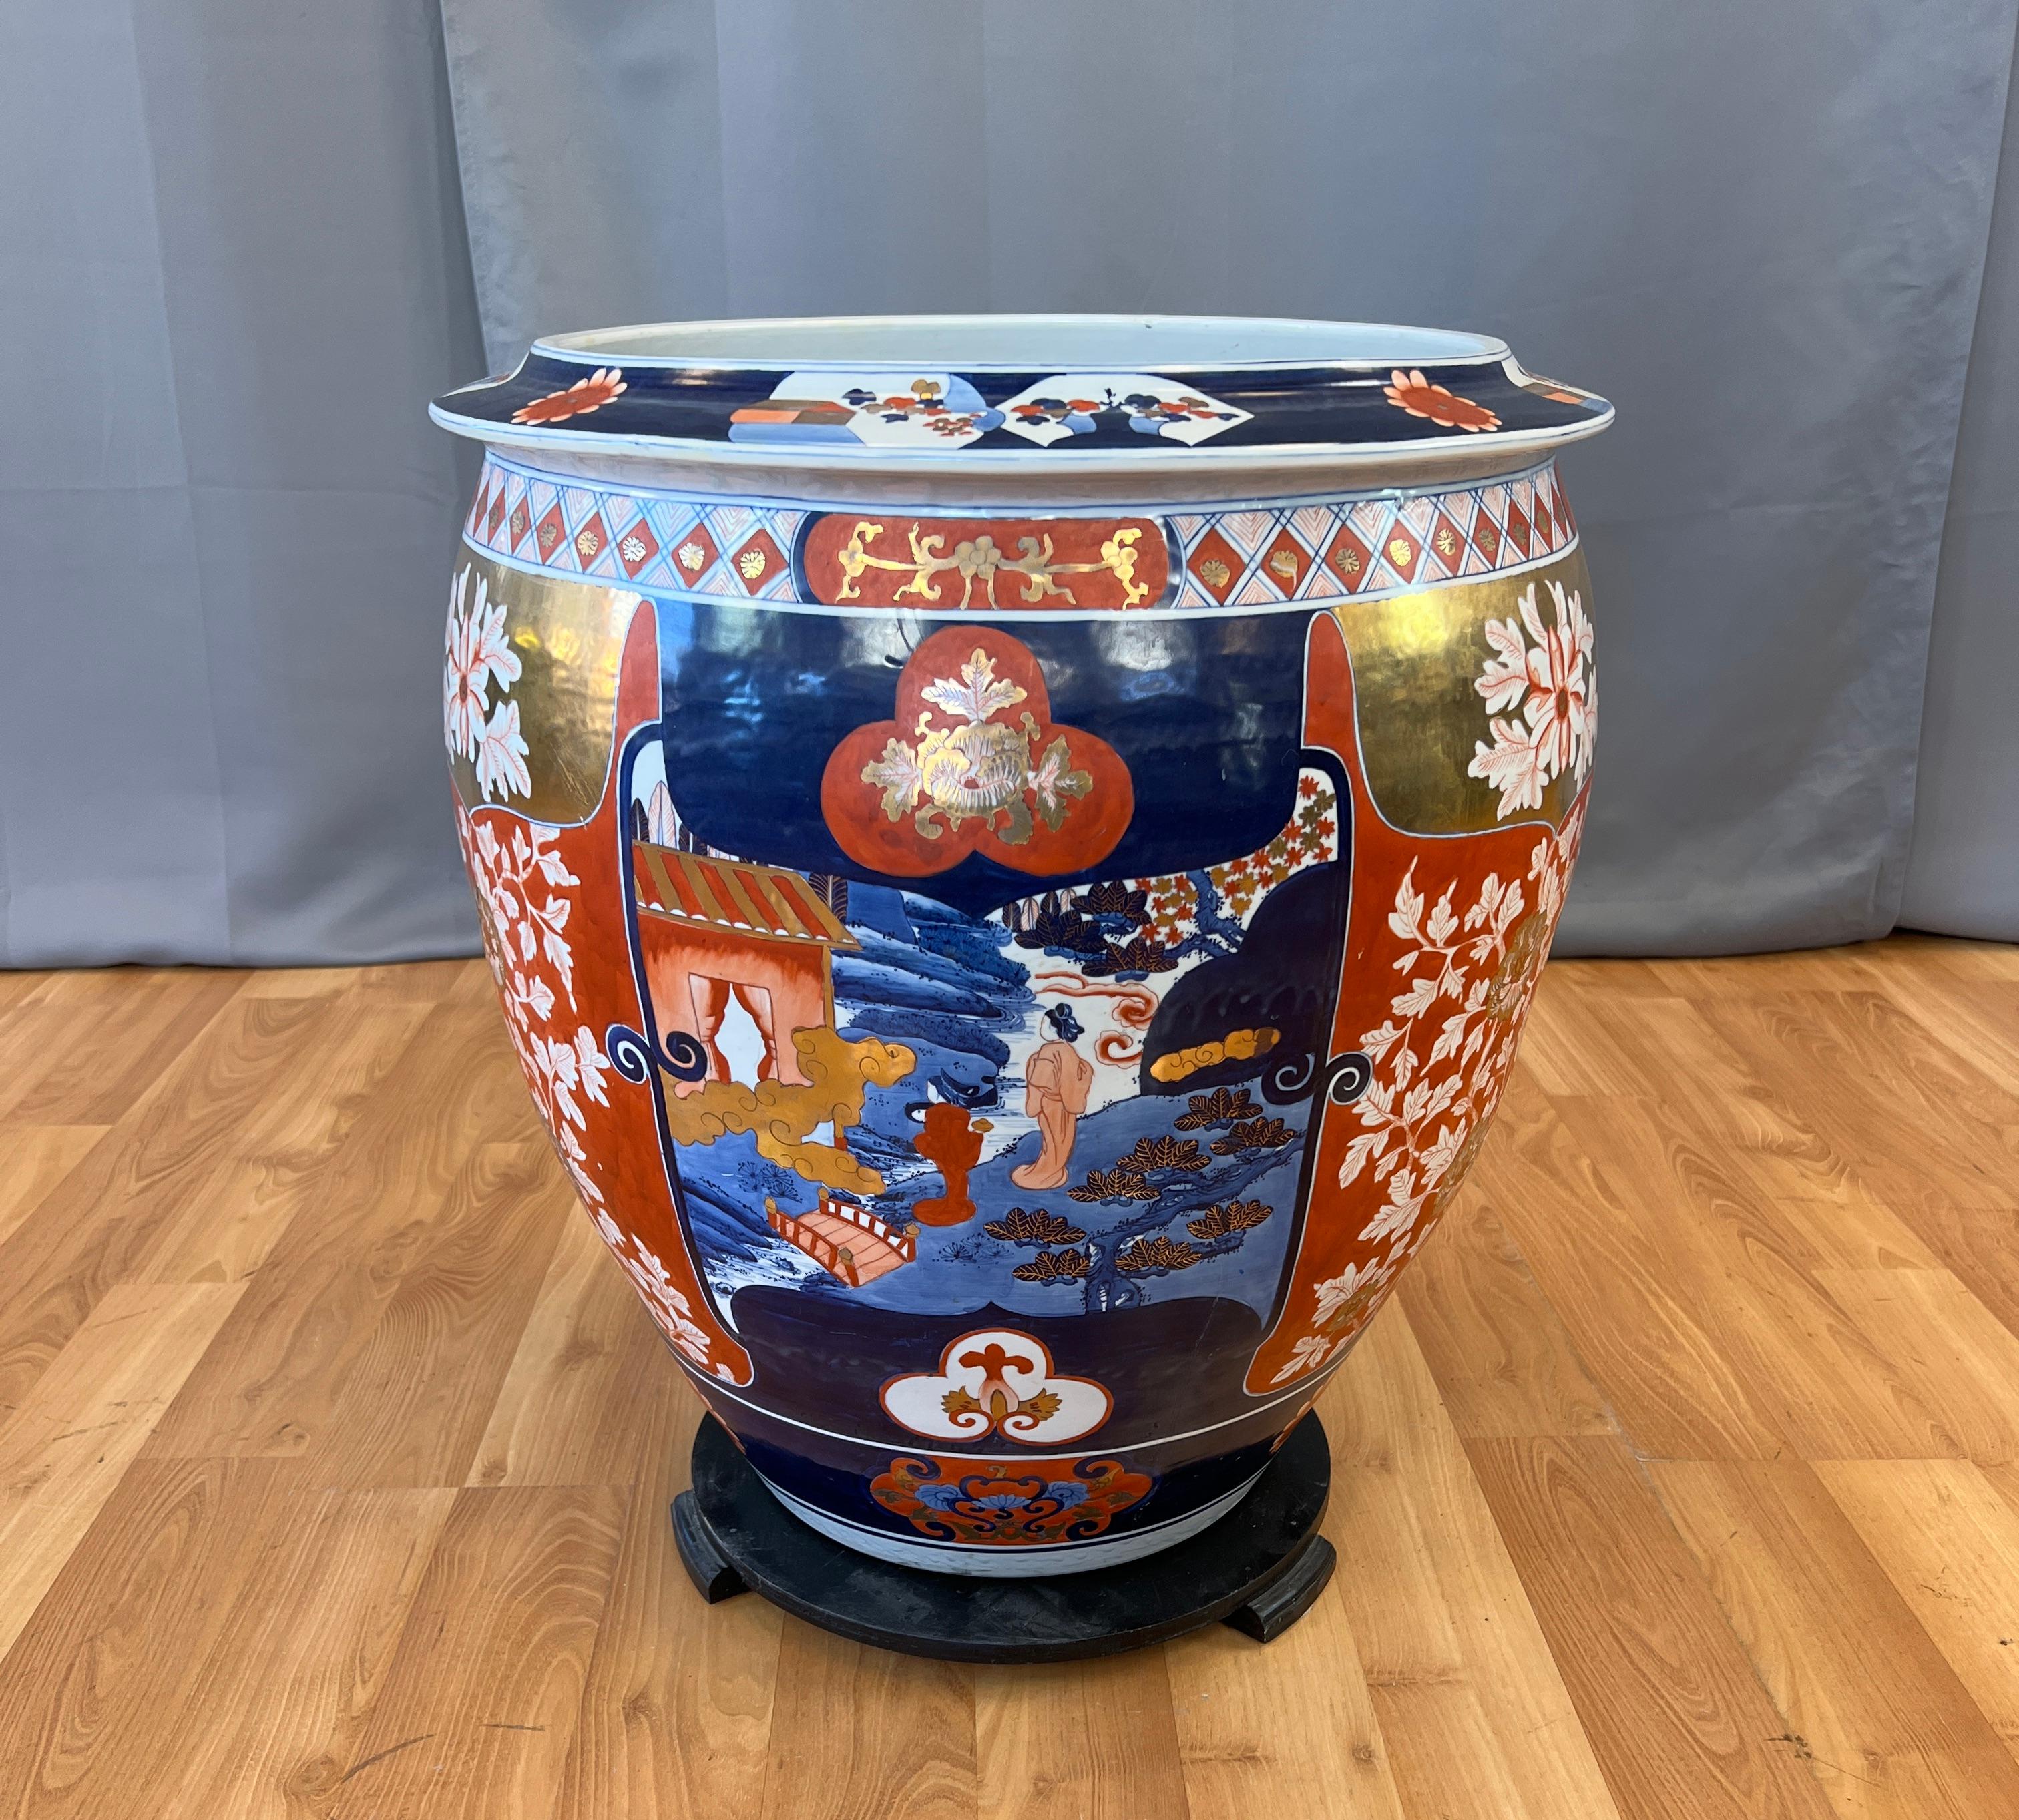 Offered here is a monumental Japanese Imaxi porcelain jardiniere. 

Wonderful colors have been used, blue, both dark and light, gold, reds and white, depicting scenes of a pair of woman walking along a creek above a traditional Japanese bridge, with